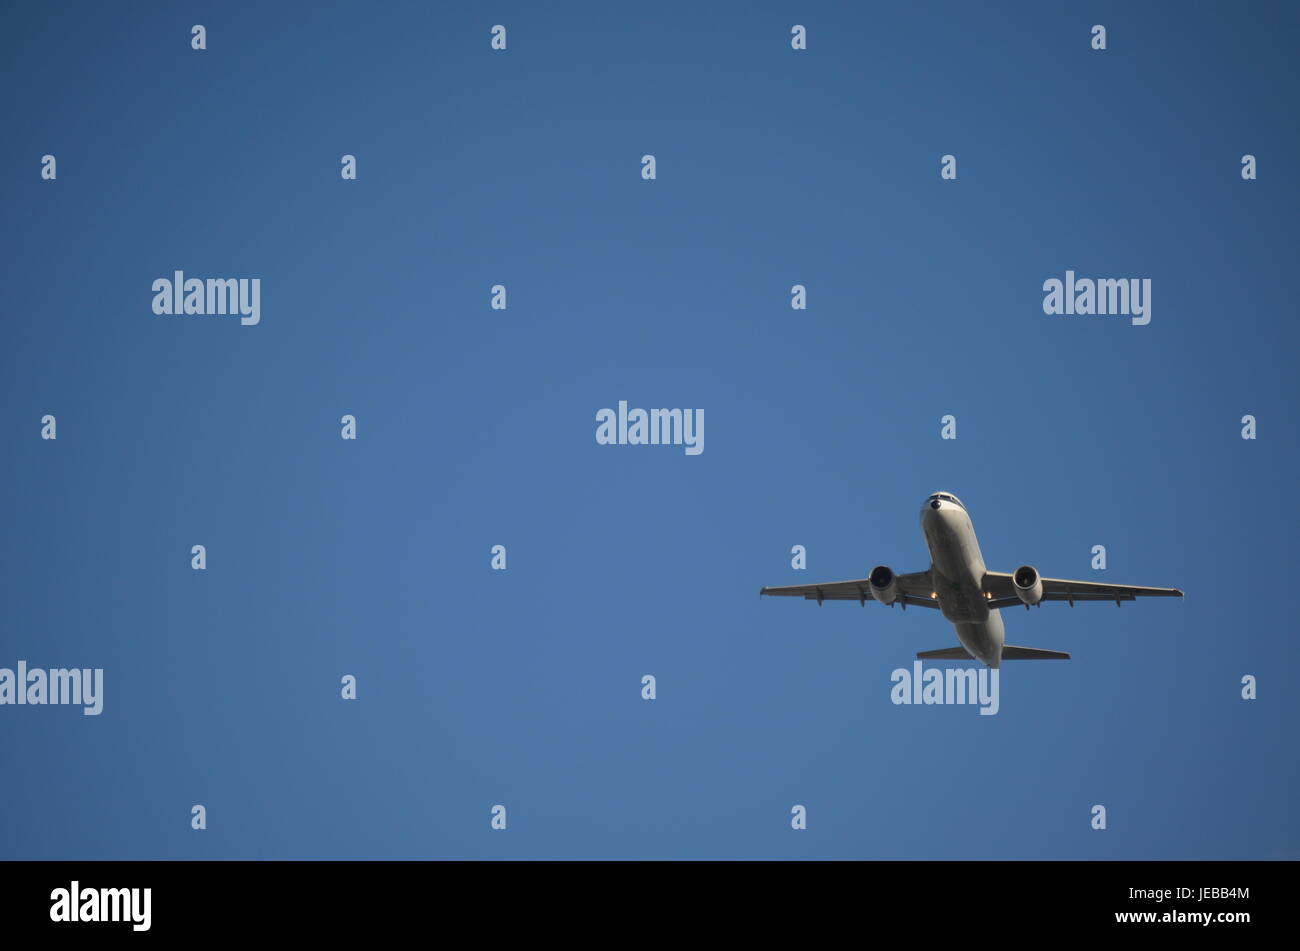 Commercial Airplane Flying Upwards Stock Photo